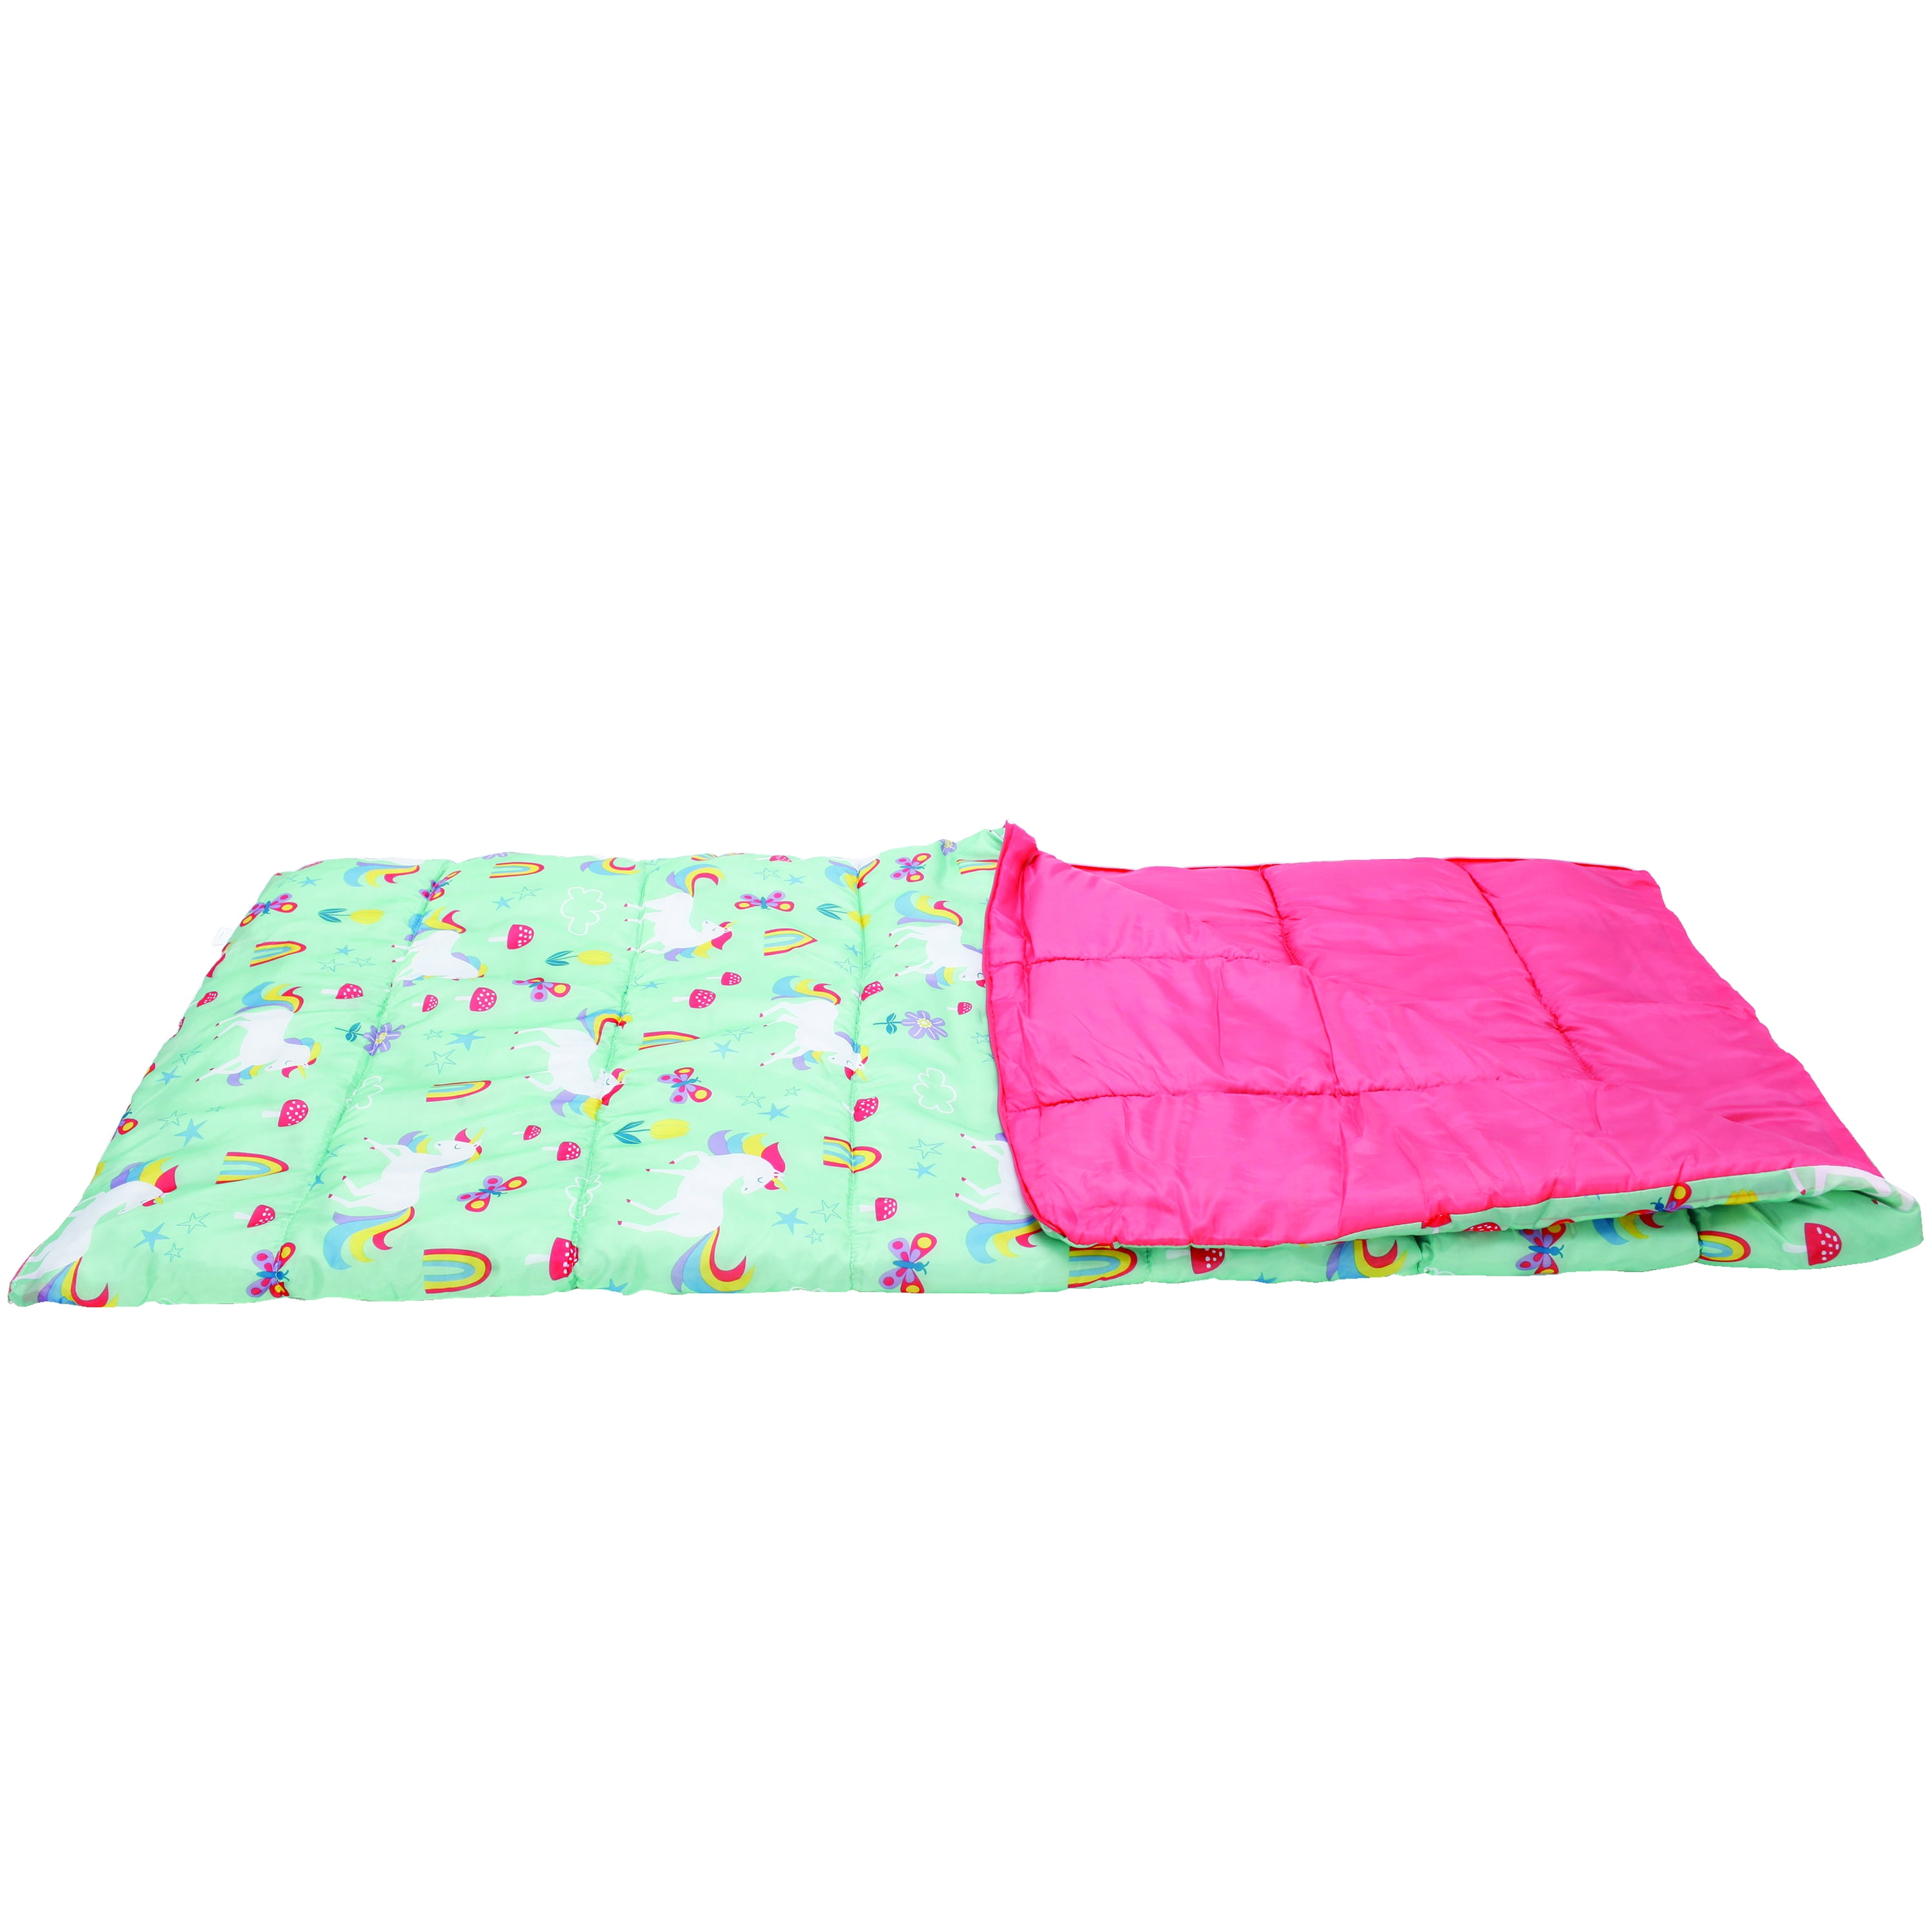 Kids Ready Bed Roll Out Sleeping Bag with Built in Foam Mat carry bag PINK 